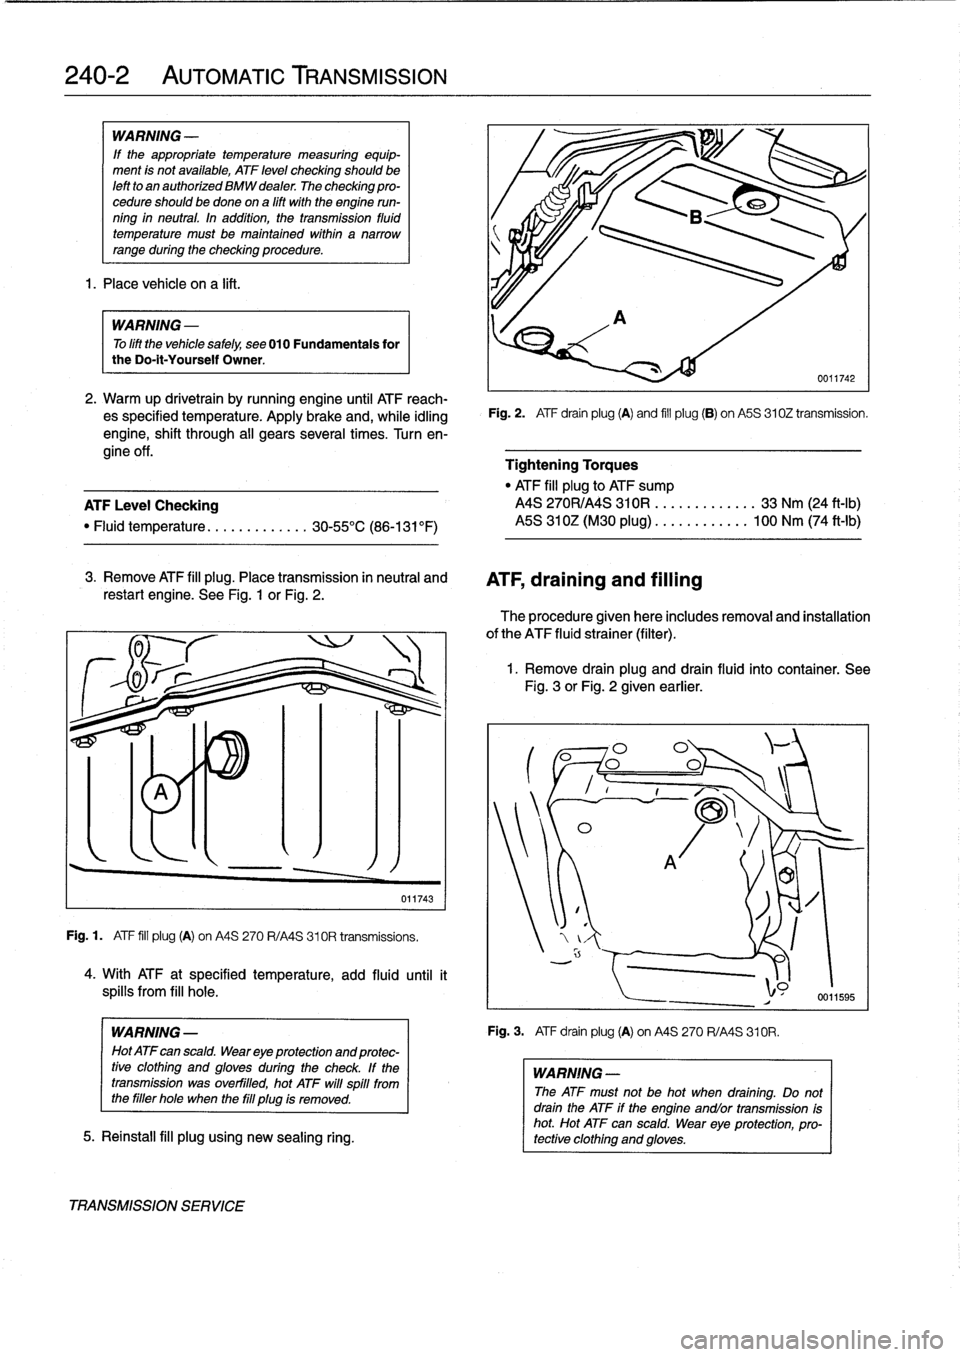 BMW 325i 1993 E36 Owners Manual 
240-2

	

AUTOMATIC
TRANSMISSION

WARNING
-

If
the
appropriate
temperature
measuring
equip-
ment
is
not
available,
ATF
leve¡
checking
shouldbe
left
to
an
authorized
BMW
dealer
The
checking
pro-
ced